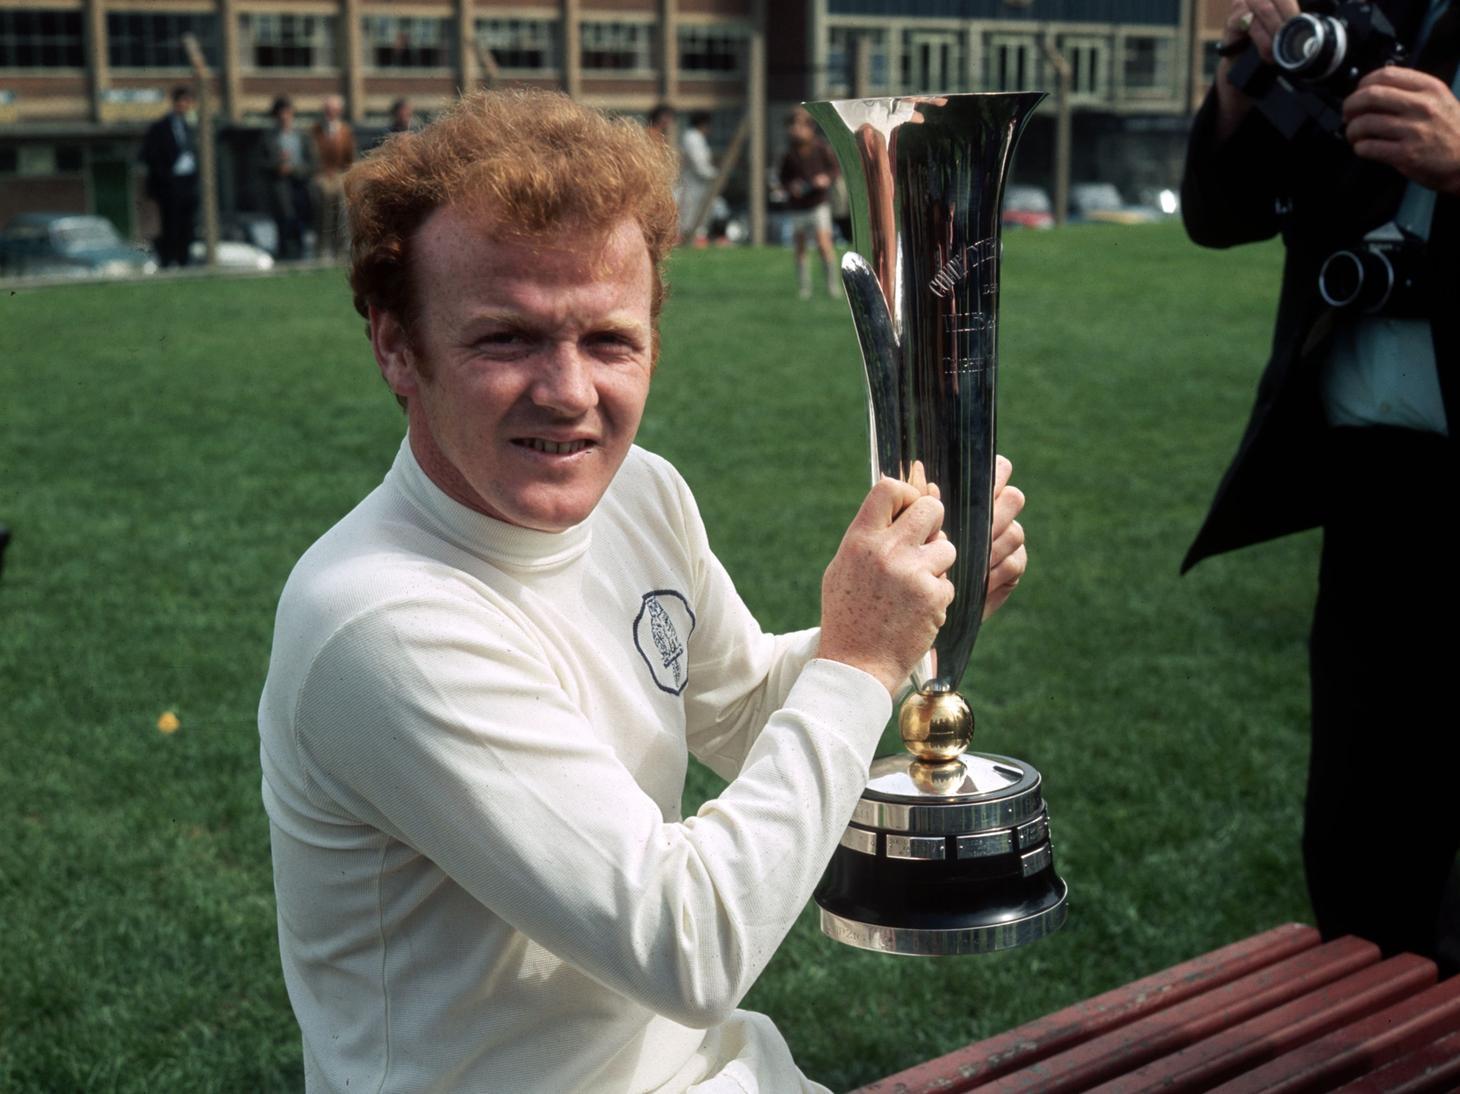 Billy Bremner holds up the Fairs' Cup (UEFA Cup) which his team won after beating Juventus over two legs.